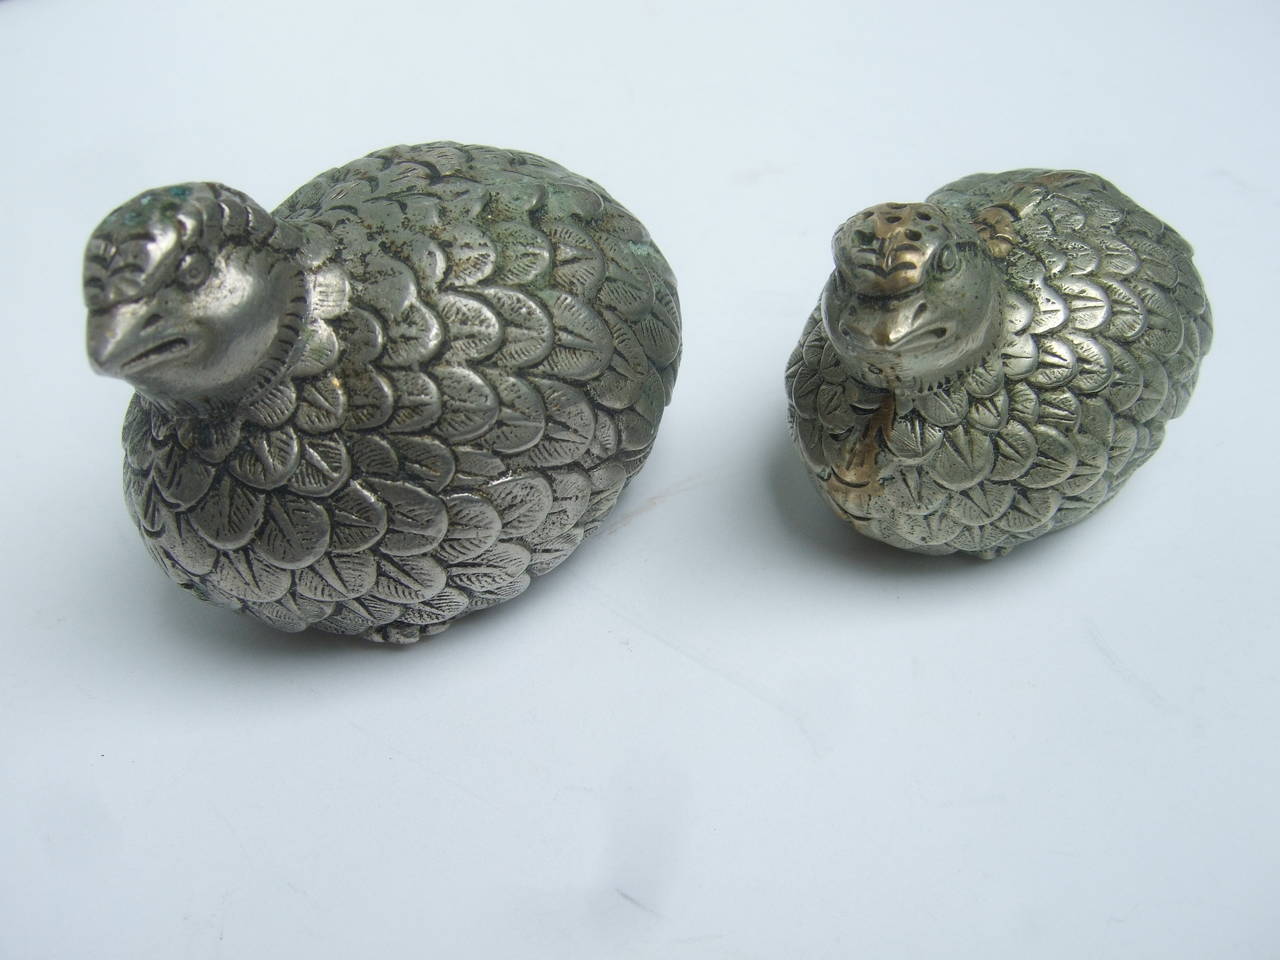 Gucci Italy silver metal quail salt & pepper shakers c 1970
The Italian figural bird spice shakers are designed 
with pewter tone silvery metal. The birds feather are
designed with an etched textured finish

The pair of salt & pepper shakers